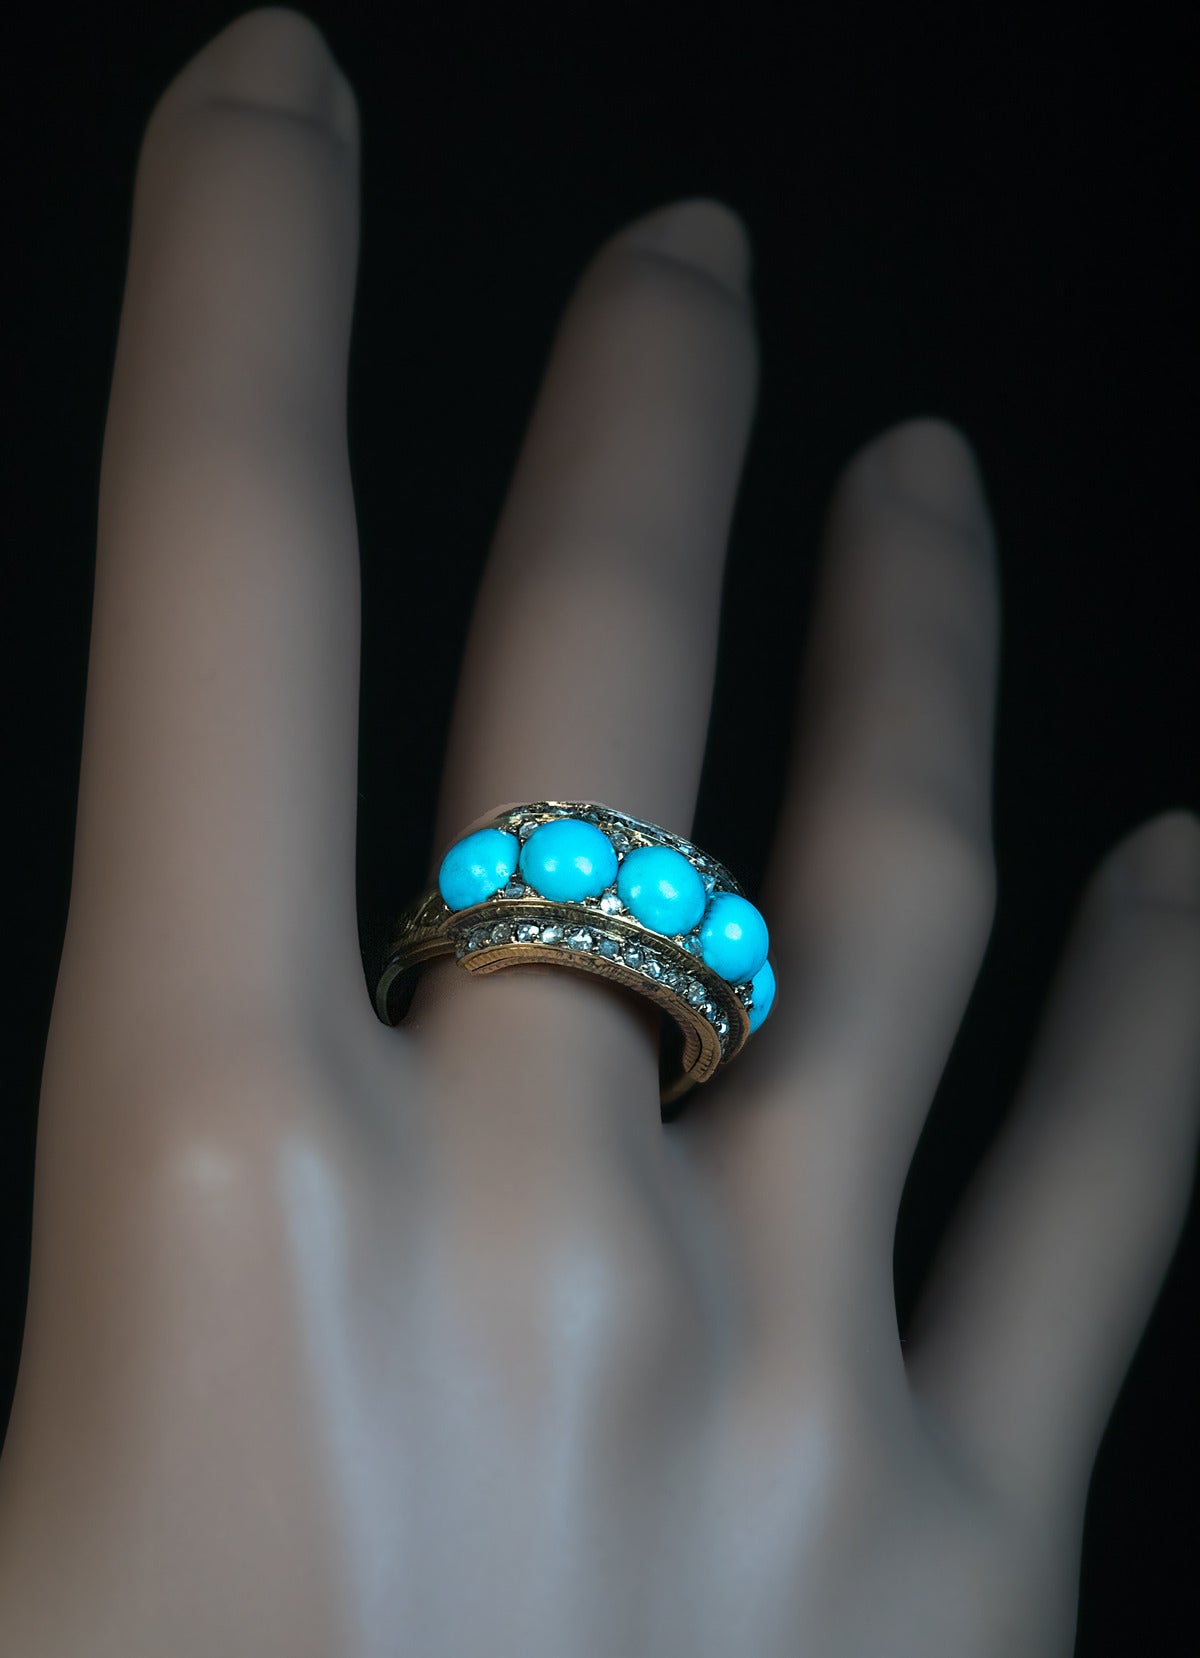 Five stone turquoise ring accented with numerous rose cut diamonds

Width 10 mm

Ring size 6.75